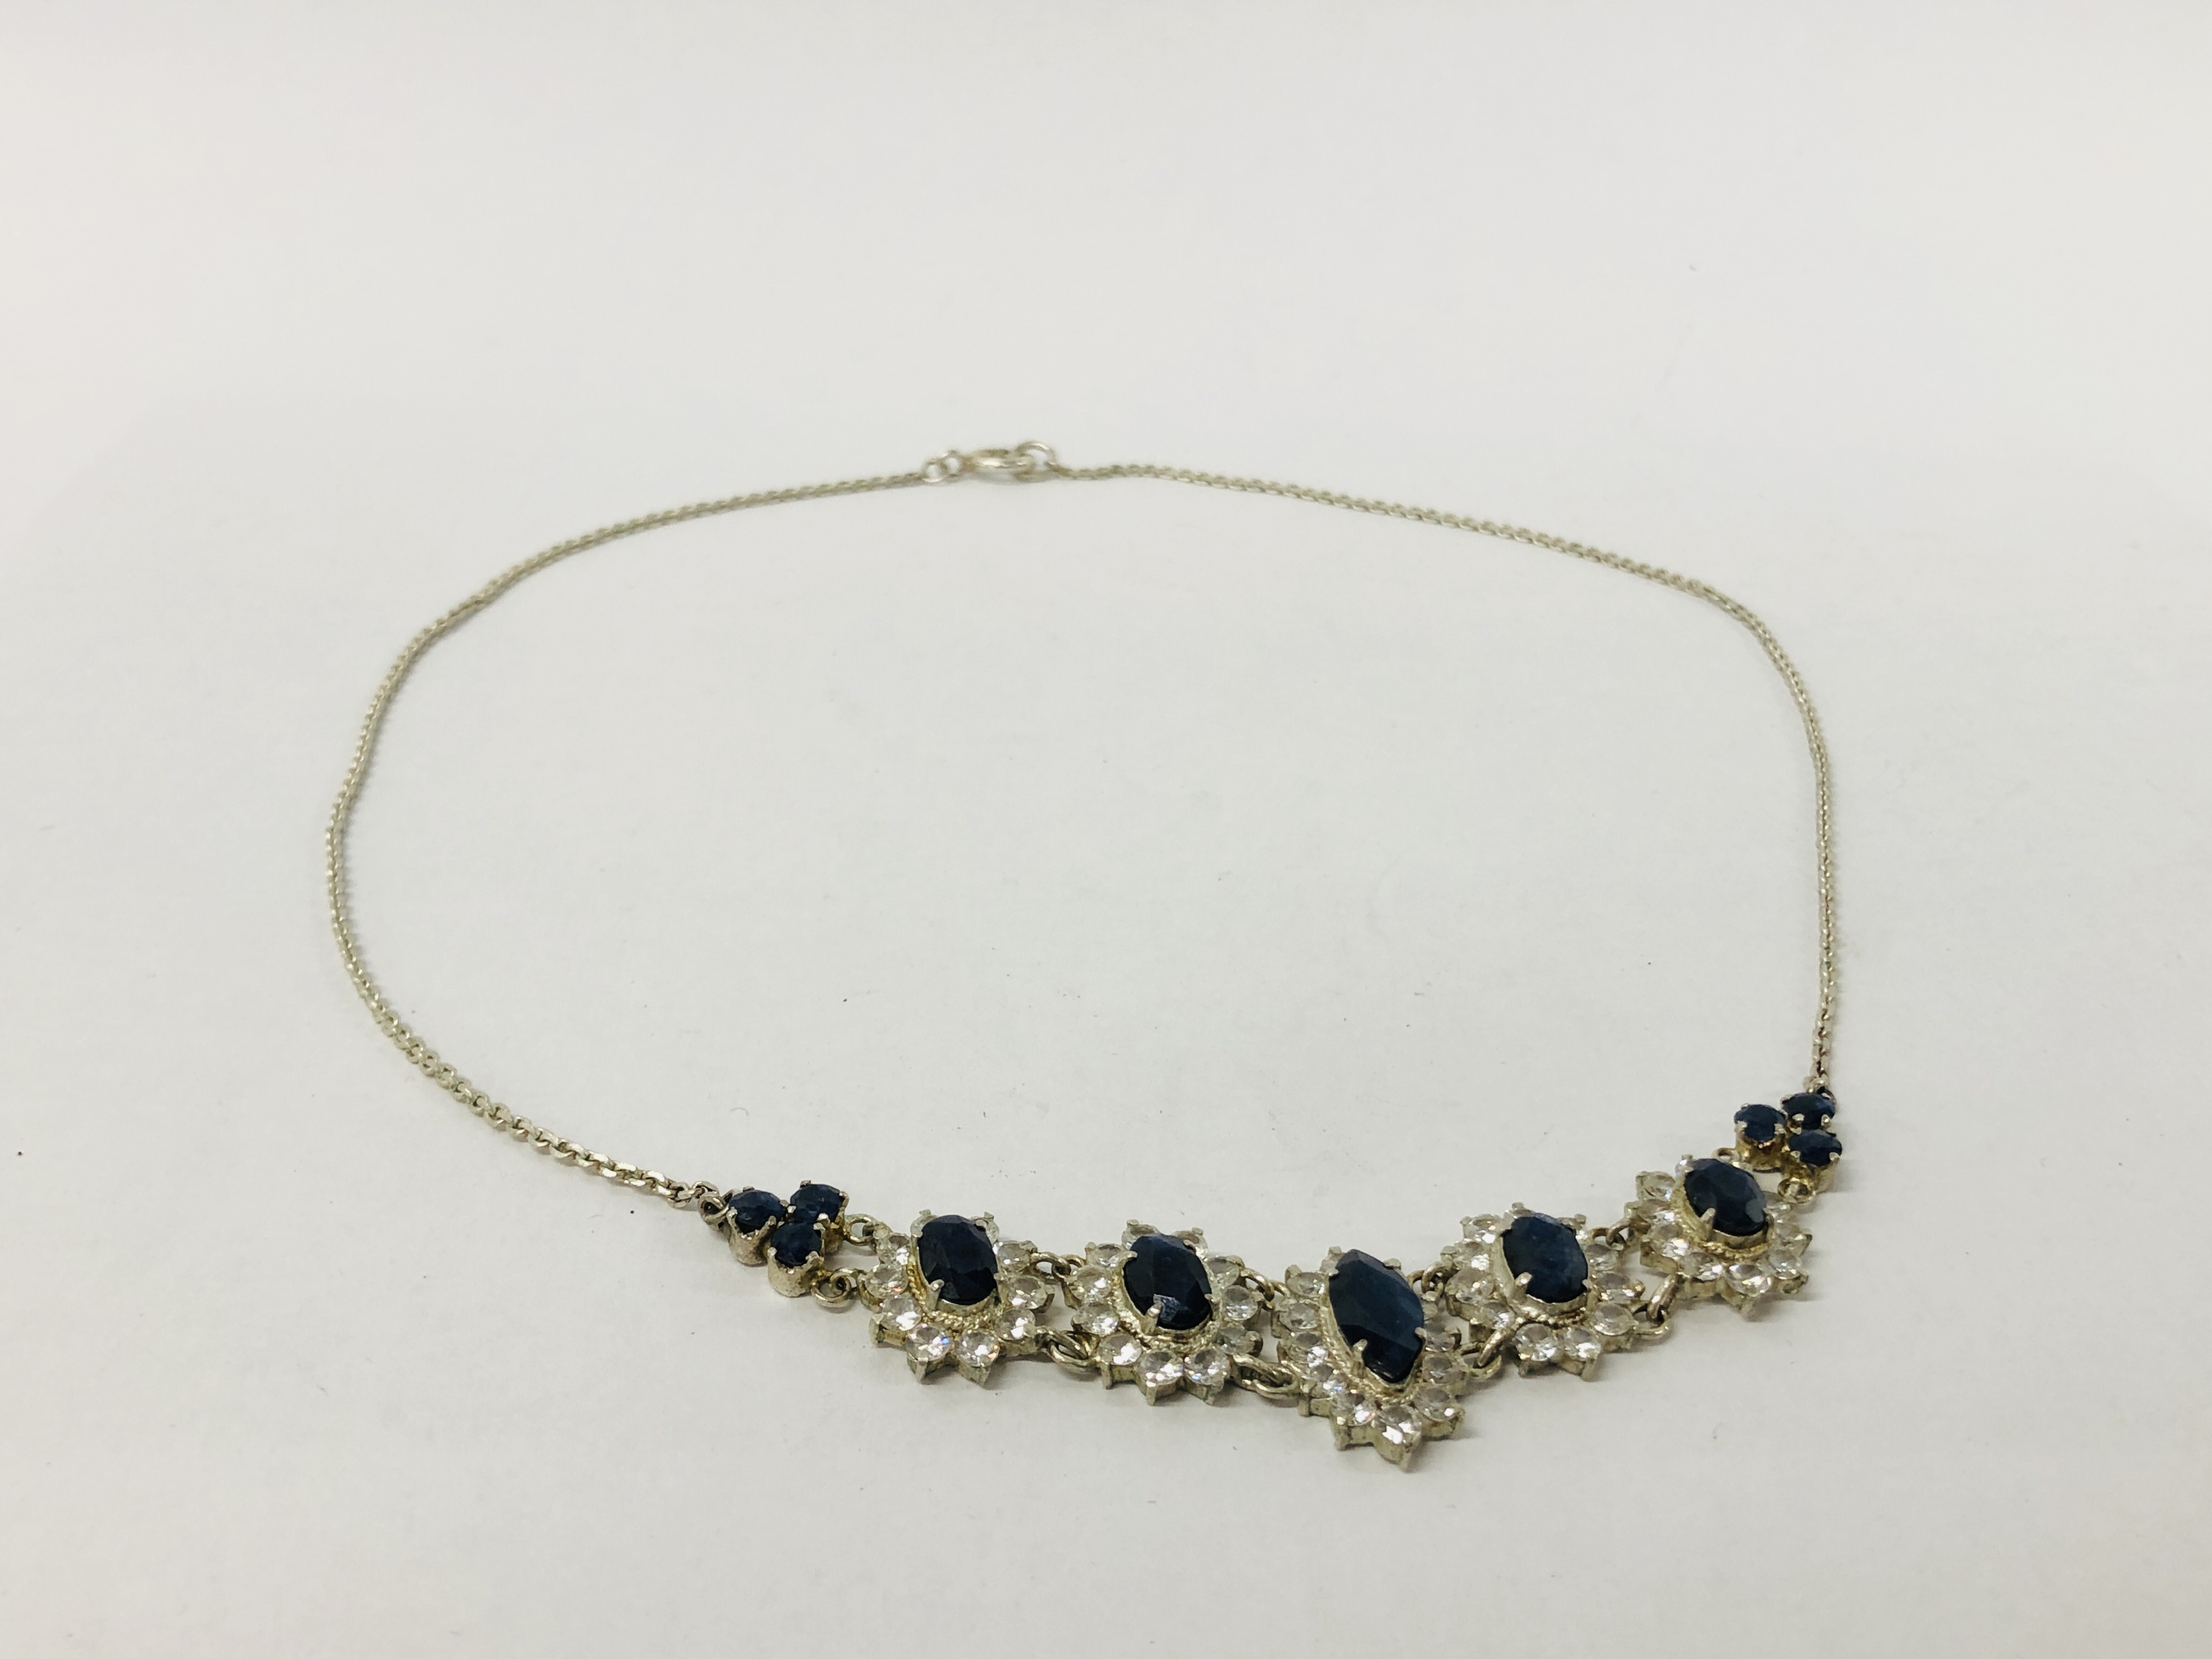 DECORATIVE SILVER EVENING NECKLACE SET WITH CENTRAL BLUE STONE, - Image 2 of 4